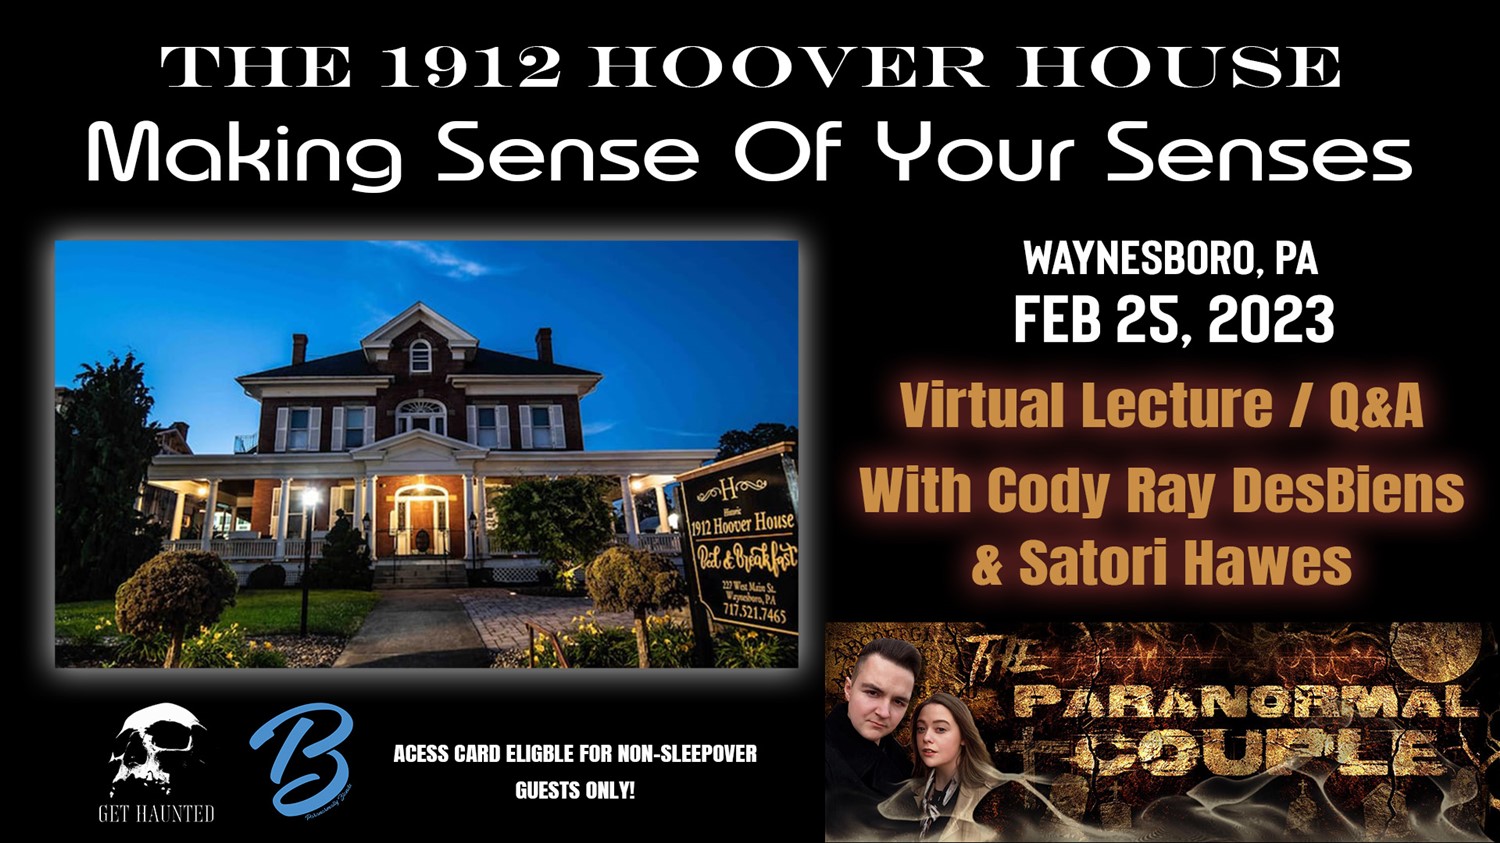 The 1912 Hoover House Making Sense of Your Senses on Feb 25, 16:00@The 1912 Hoover House - Buy tickets and Get information on Thriller Events thriller.events